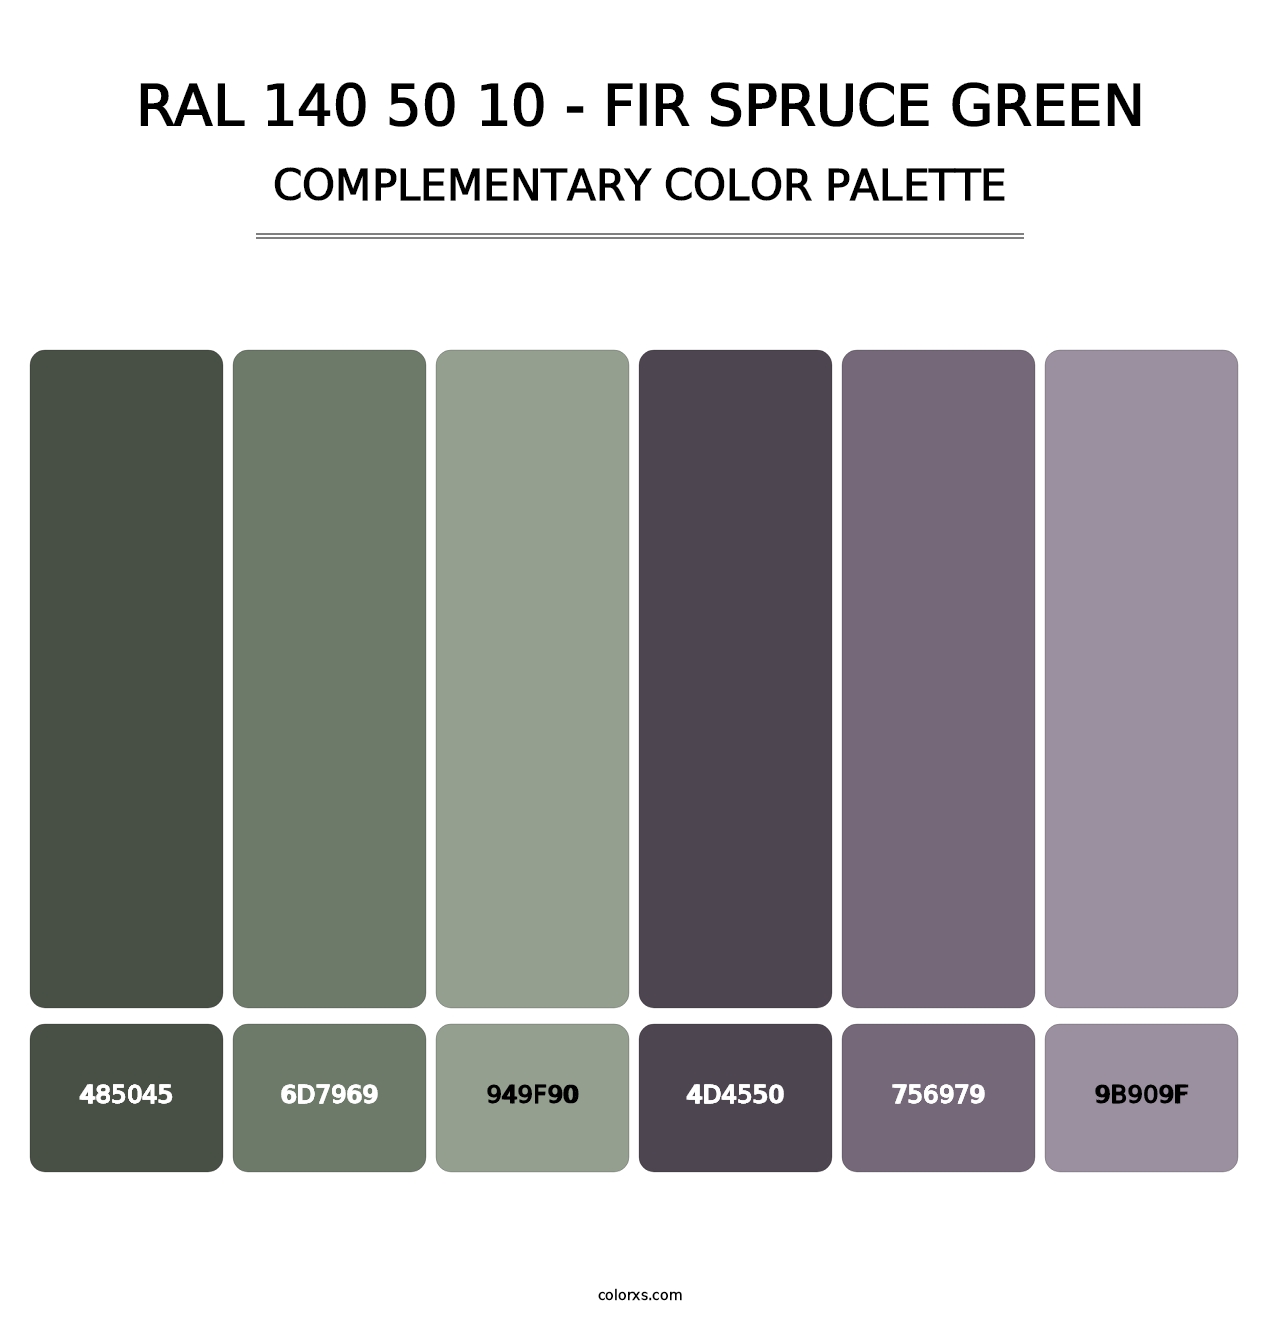 RAL 140 50 10 - Fir Spruce Green - Complementary Color Palette